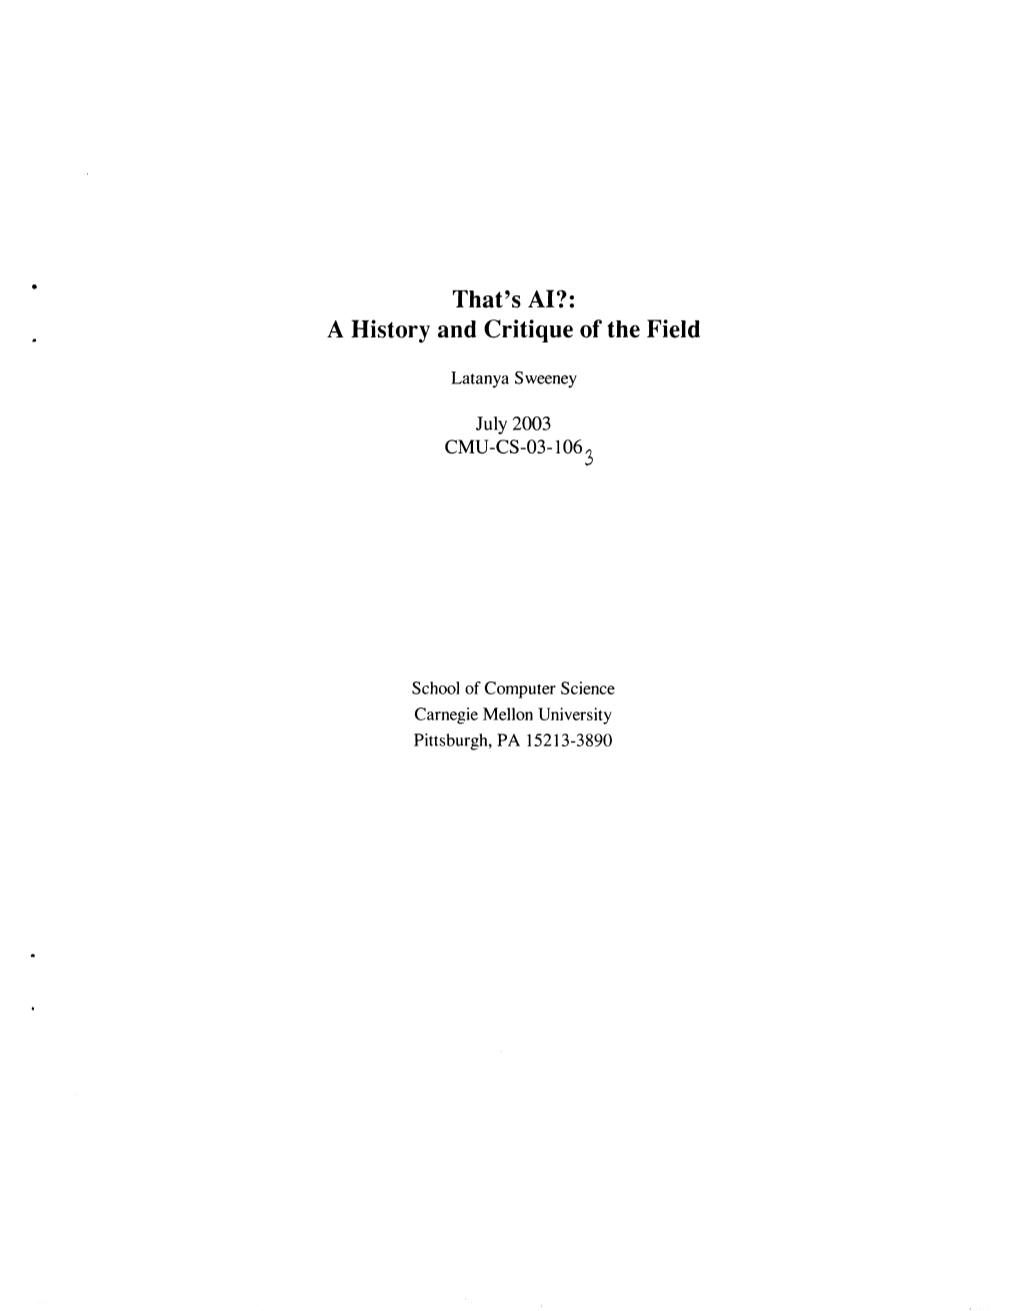 Latanya Sweeney. That's AI?: a History and Critique of the Field. Carnegie Mellon Technical Report